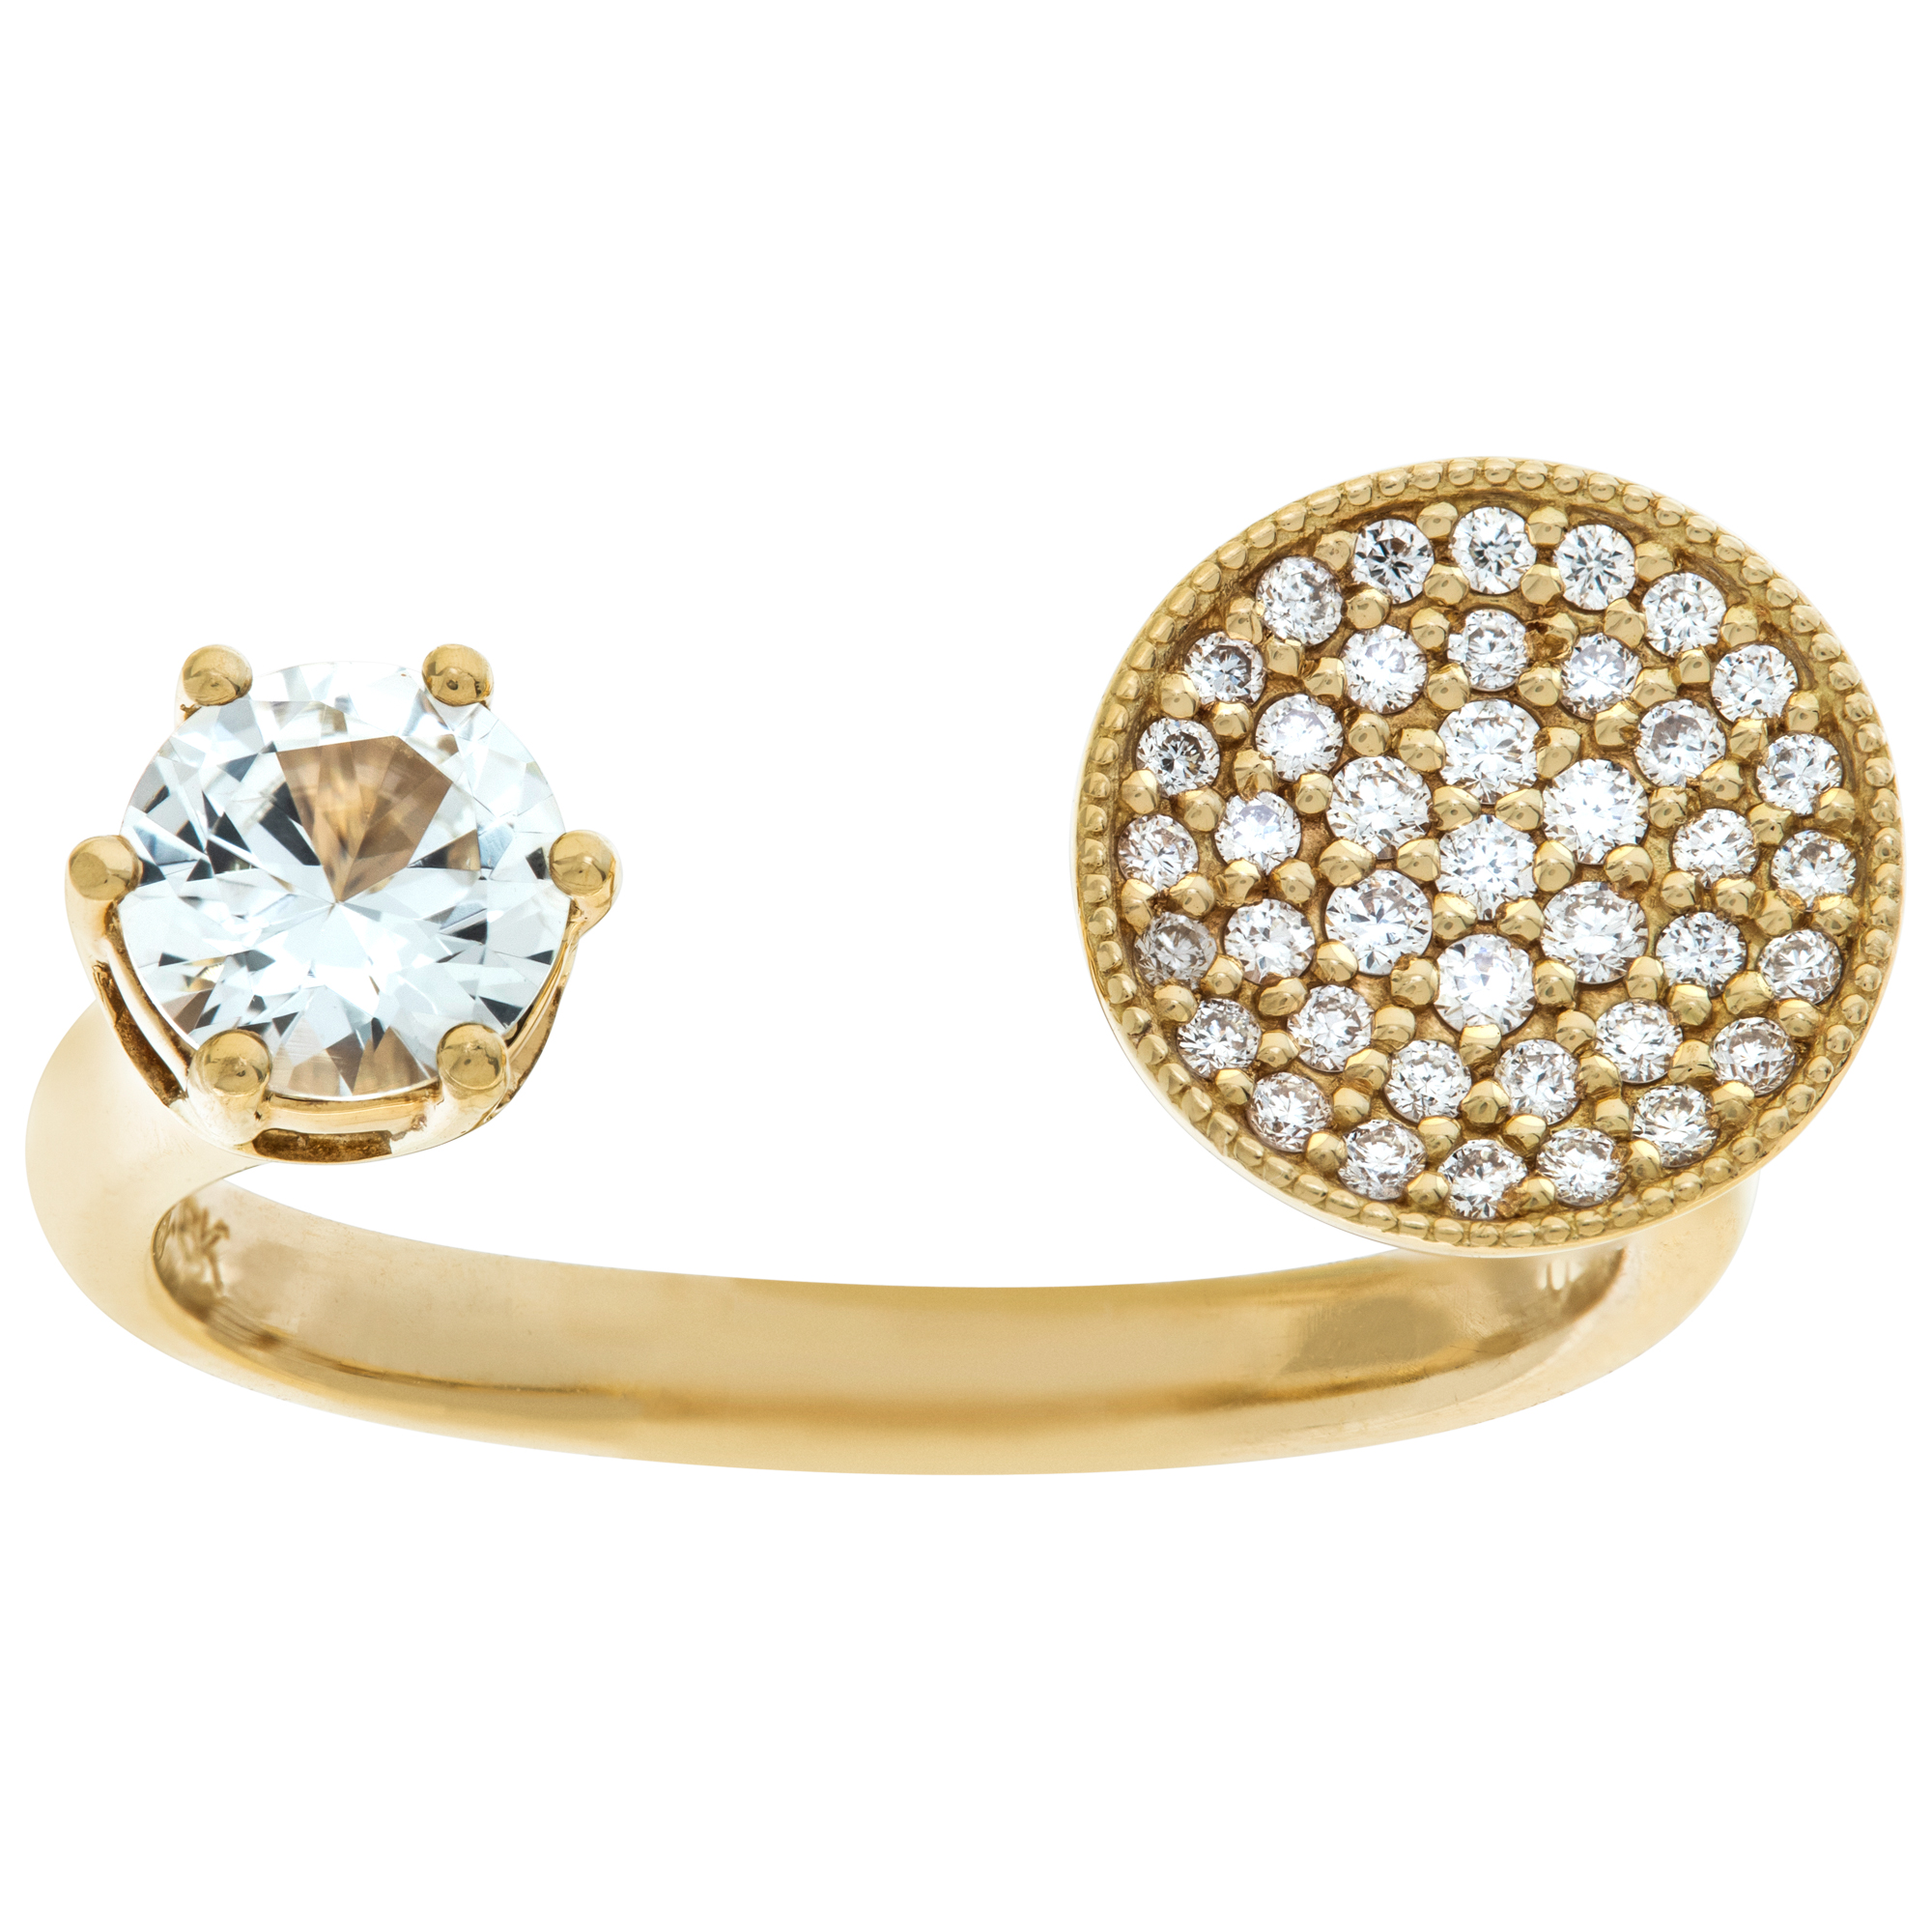 Open ring with white sapphire and diamonds set in 18k gold. 0.29 carats in dia's